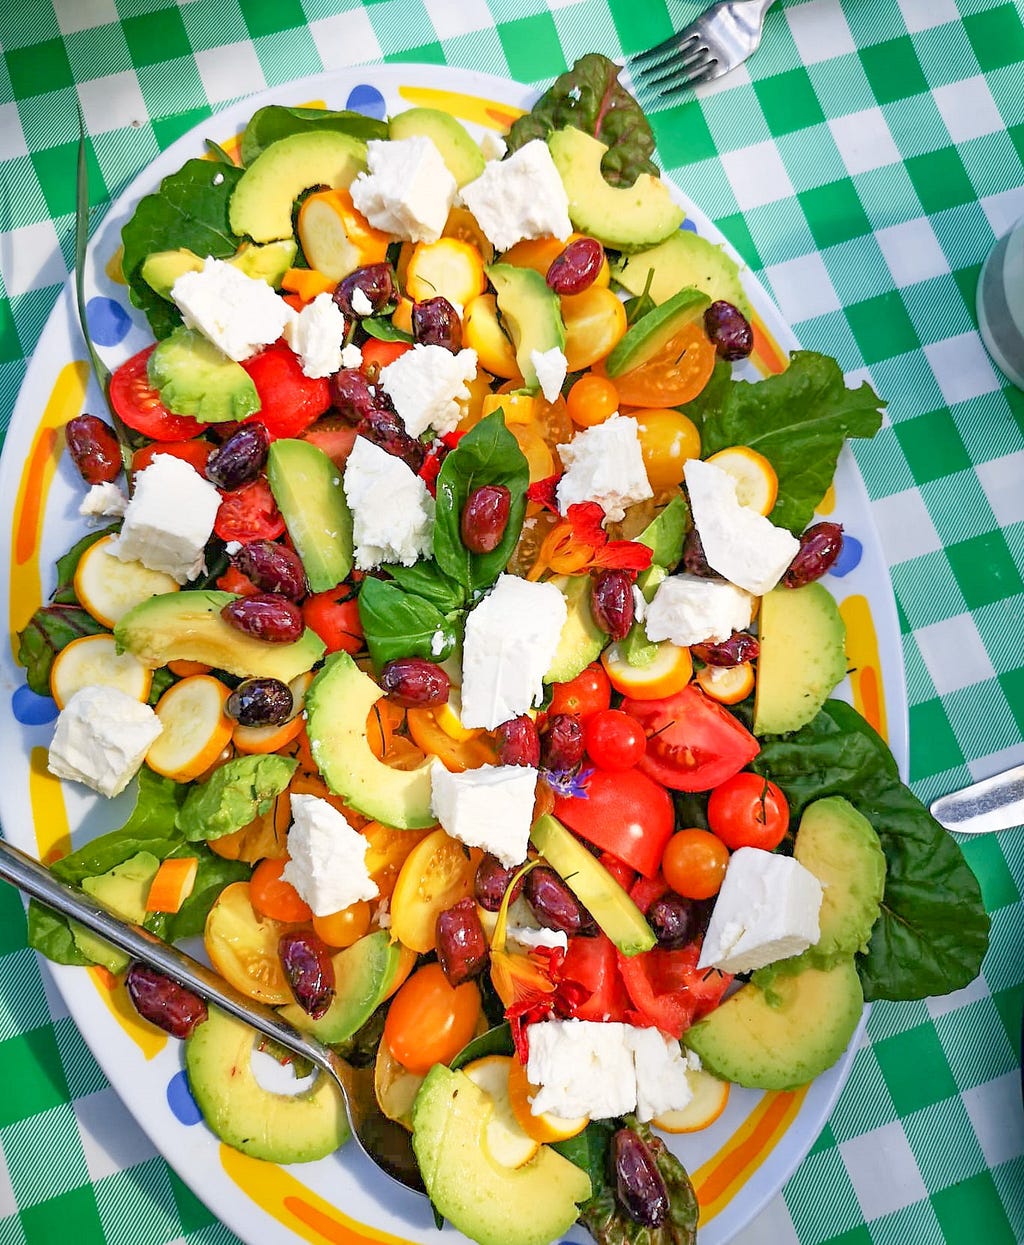 Large sharing plate of salad — multicoloured red and green vegetables